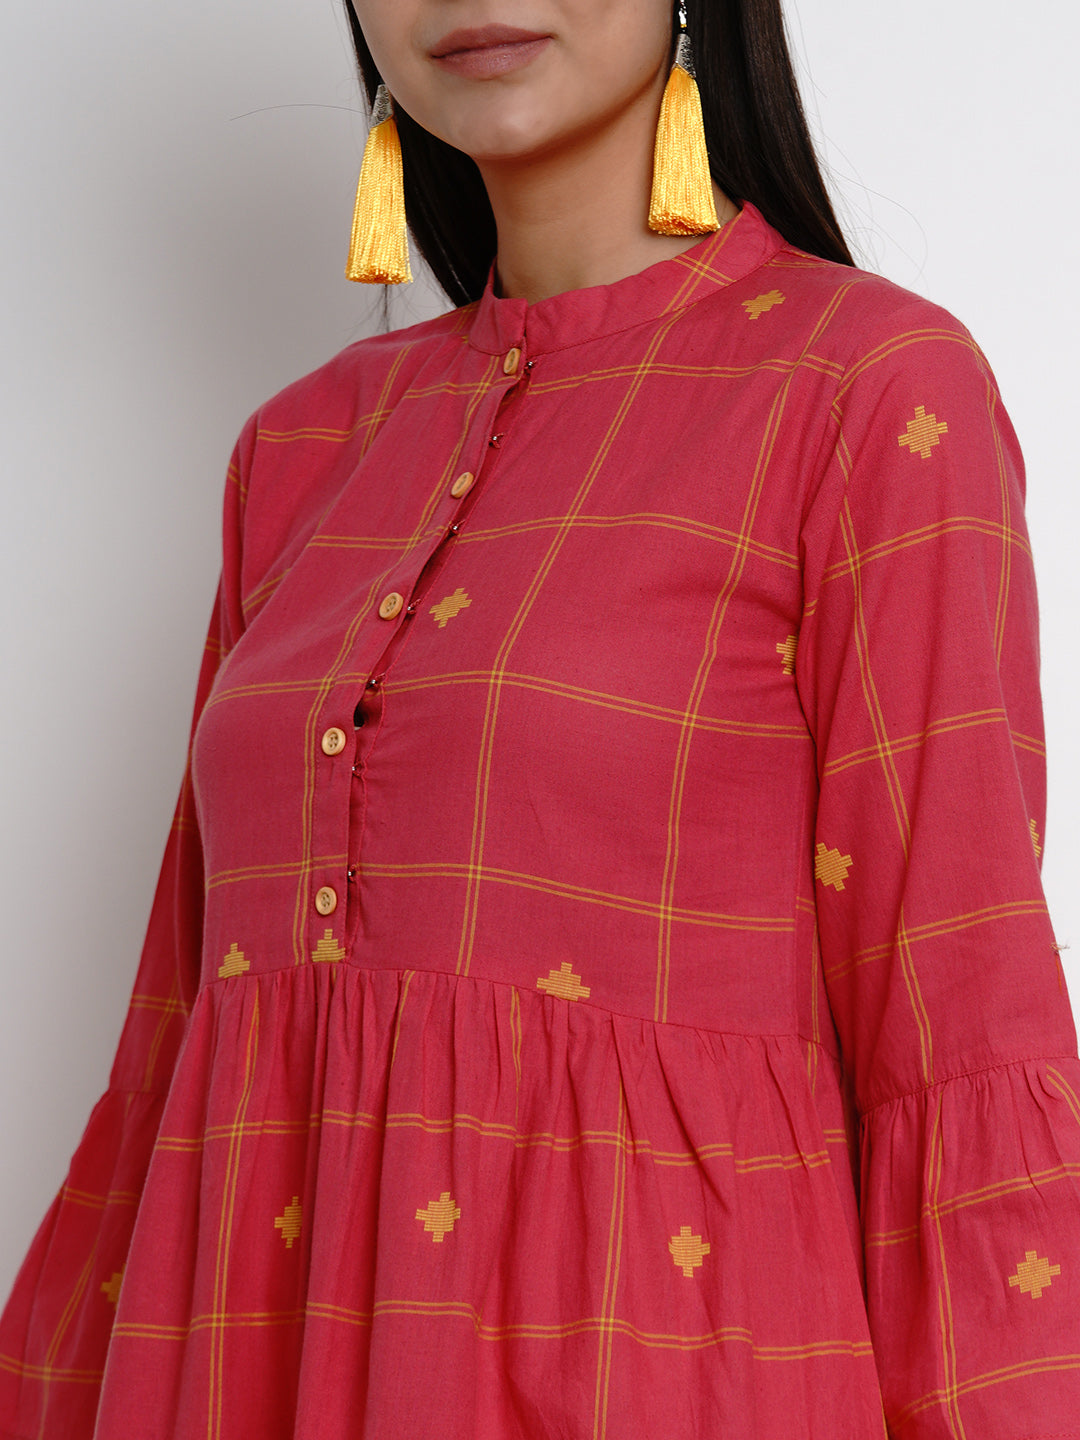 Women's Pink Yellow Plaid A-Line Gathers Detailed Ethnic Dress - Bhama Couture